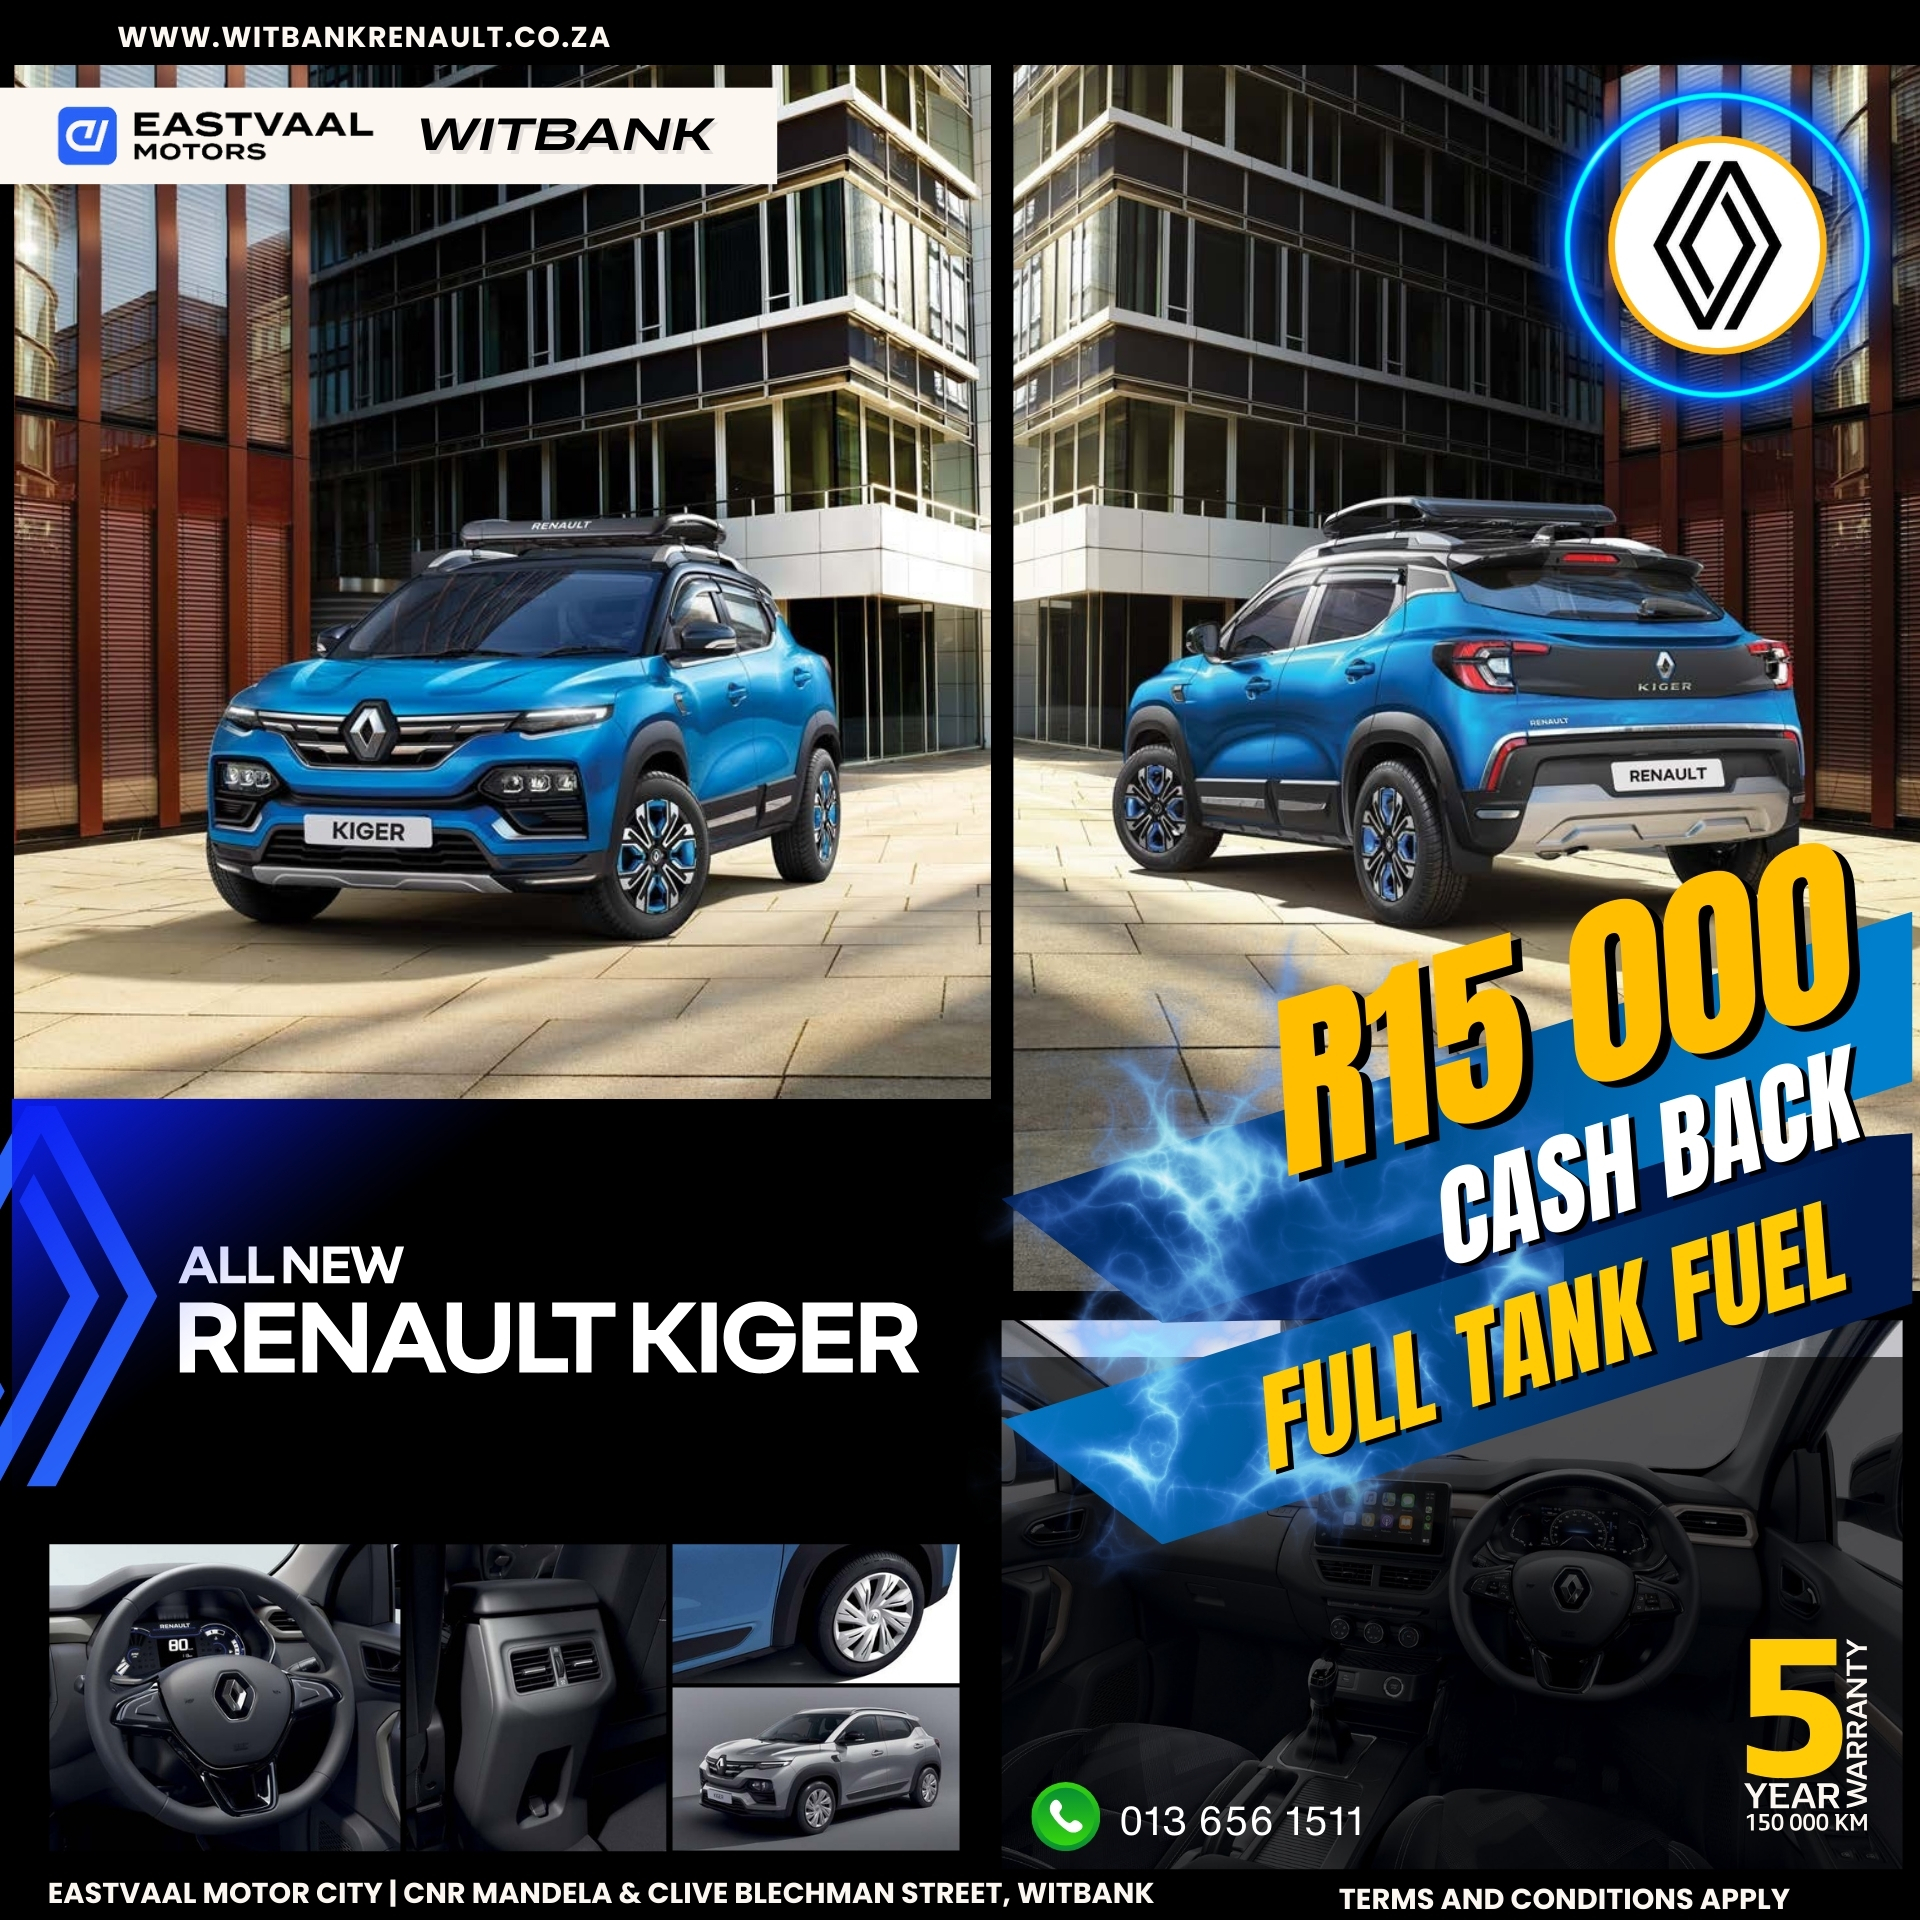 Renault Kiger image from 